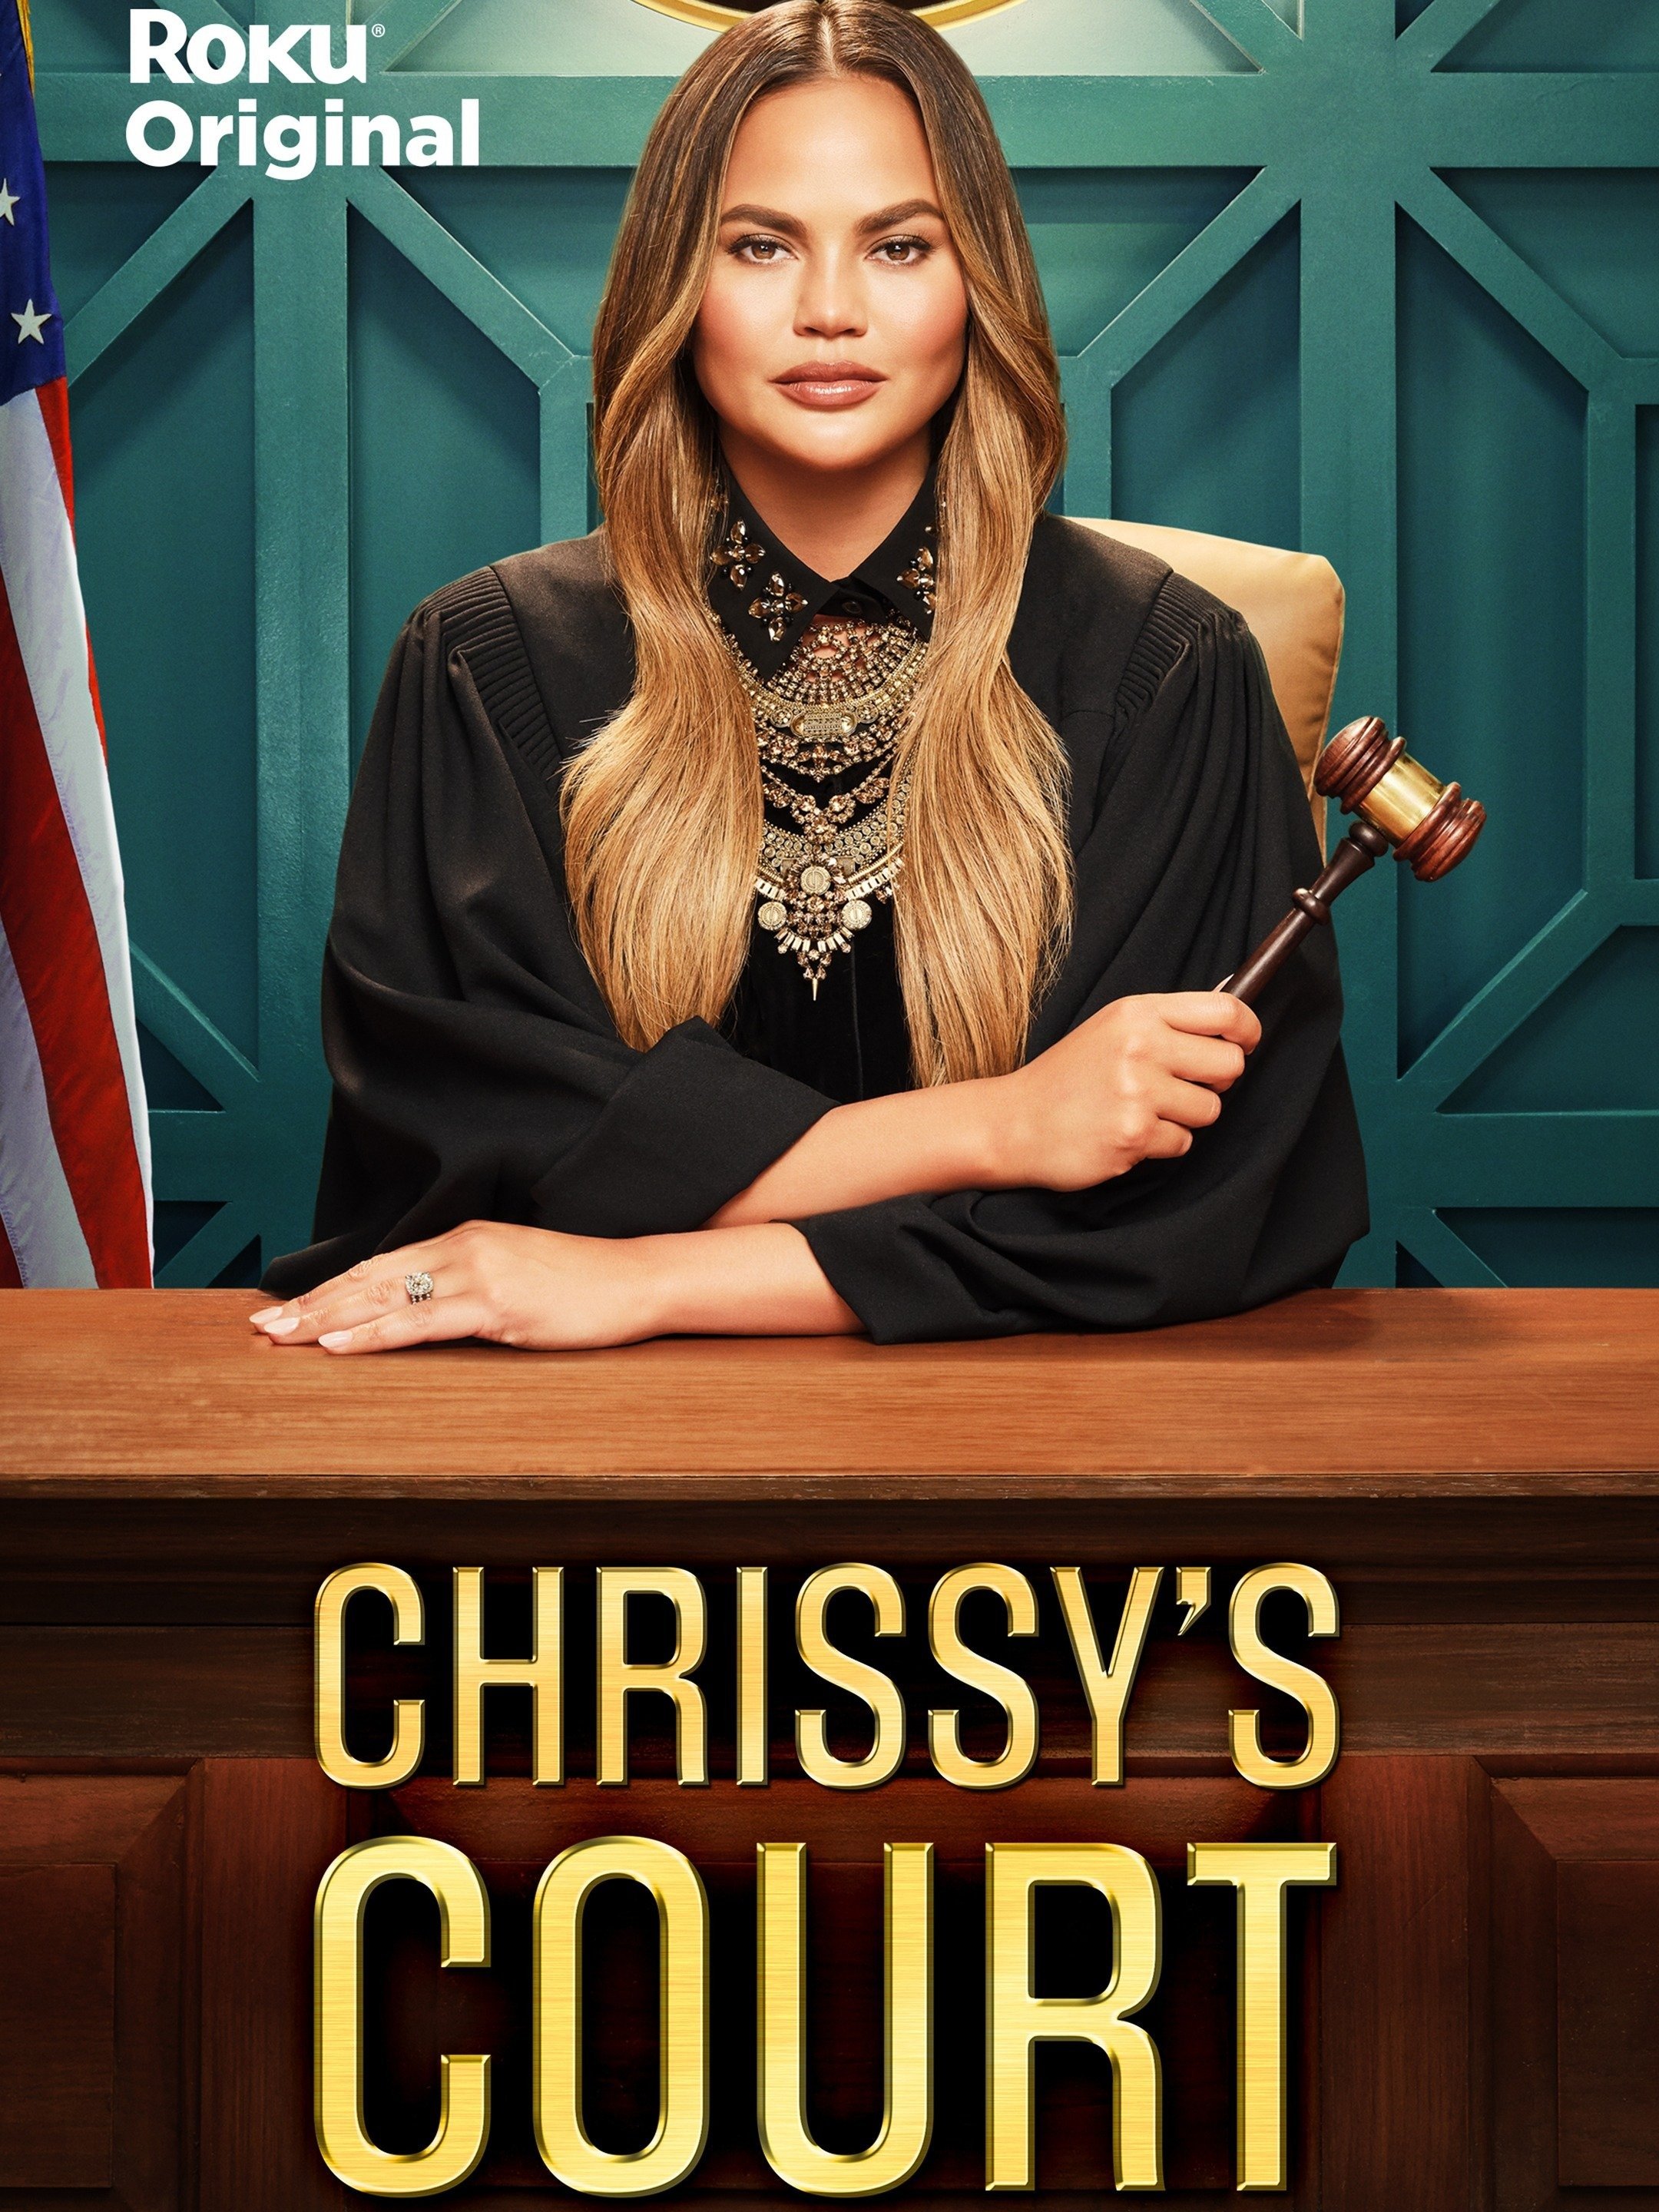 Chrissy s Court Rotten Tomatoes